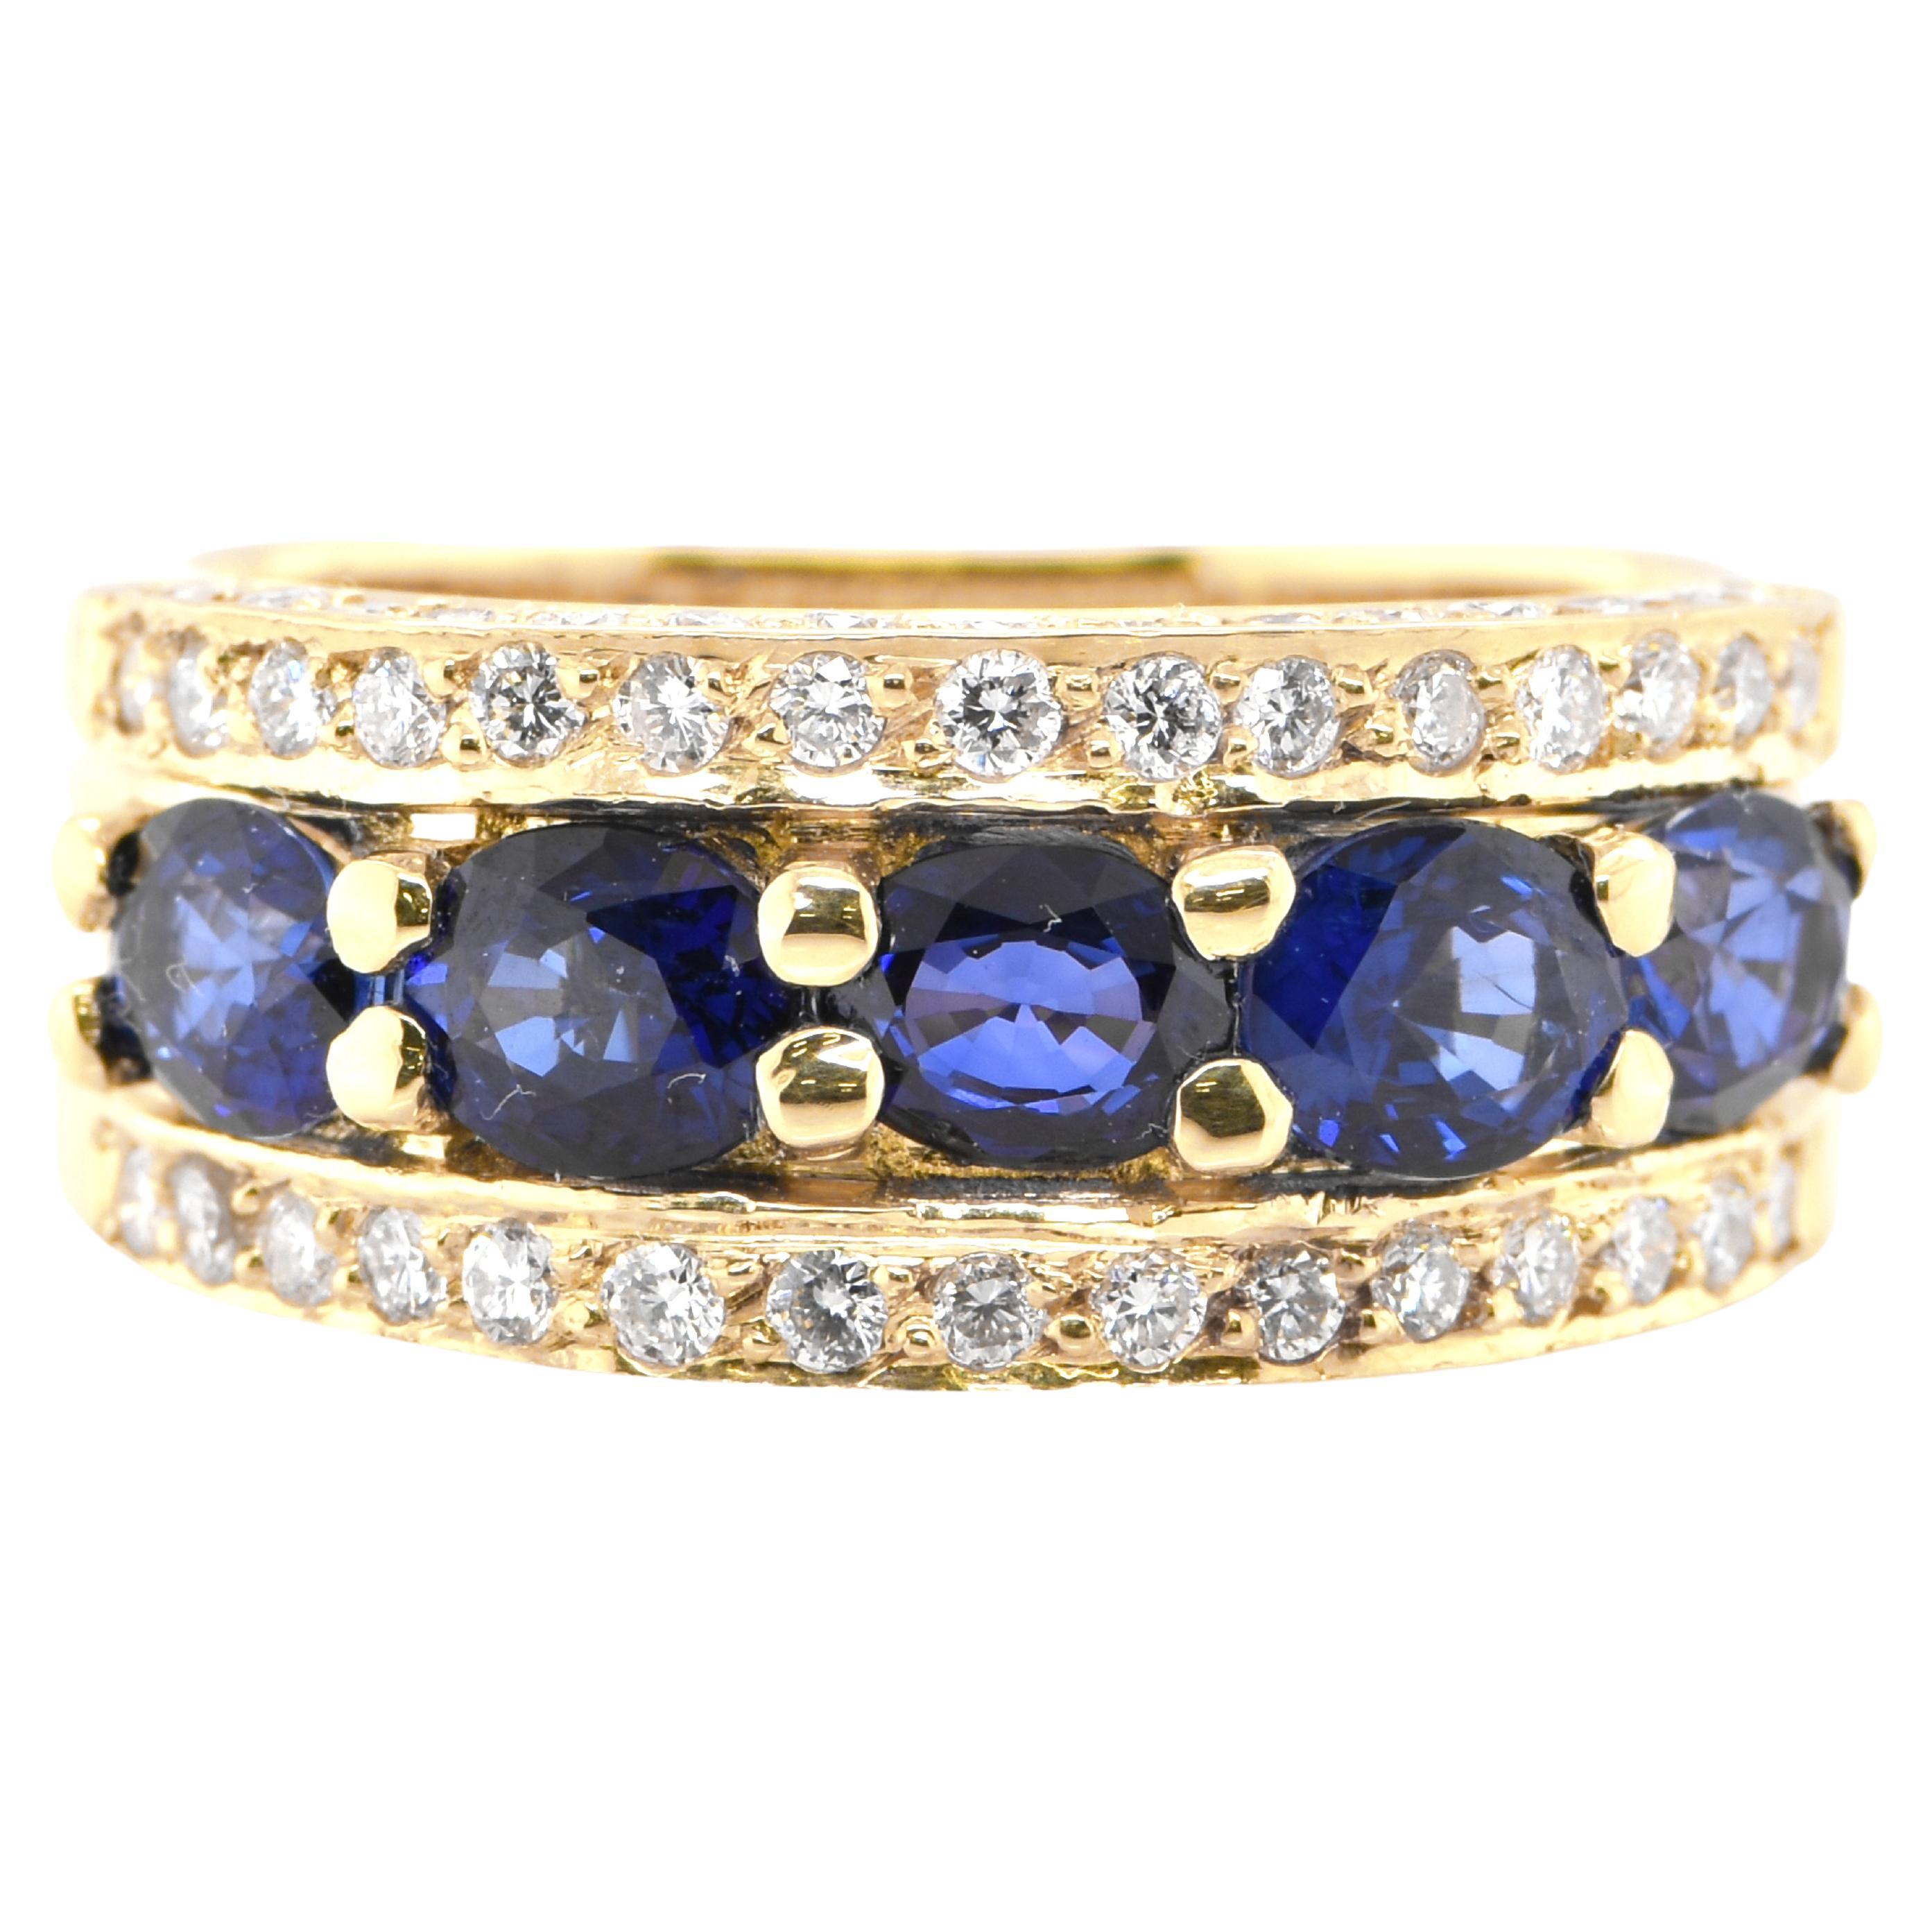 Natural Oval Cut Sapphires and Diamond Half Eternity Band Ring Set in 18K Gold